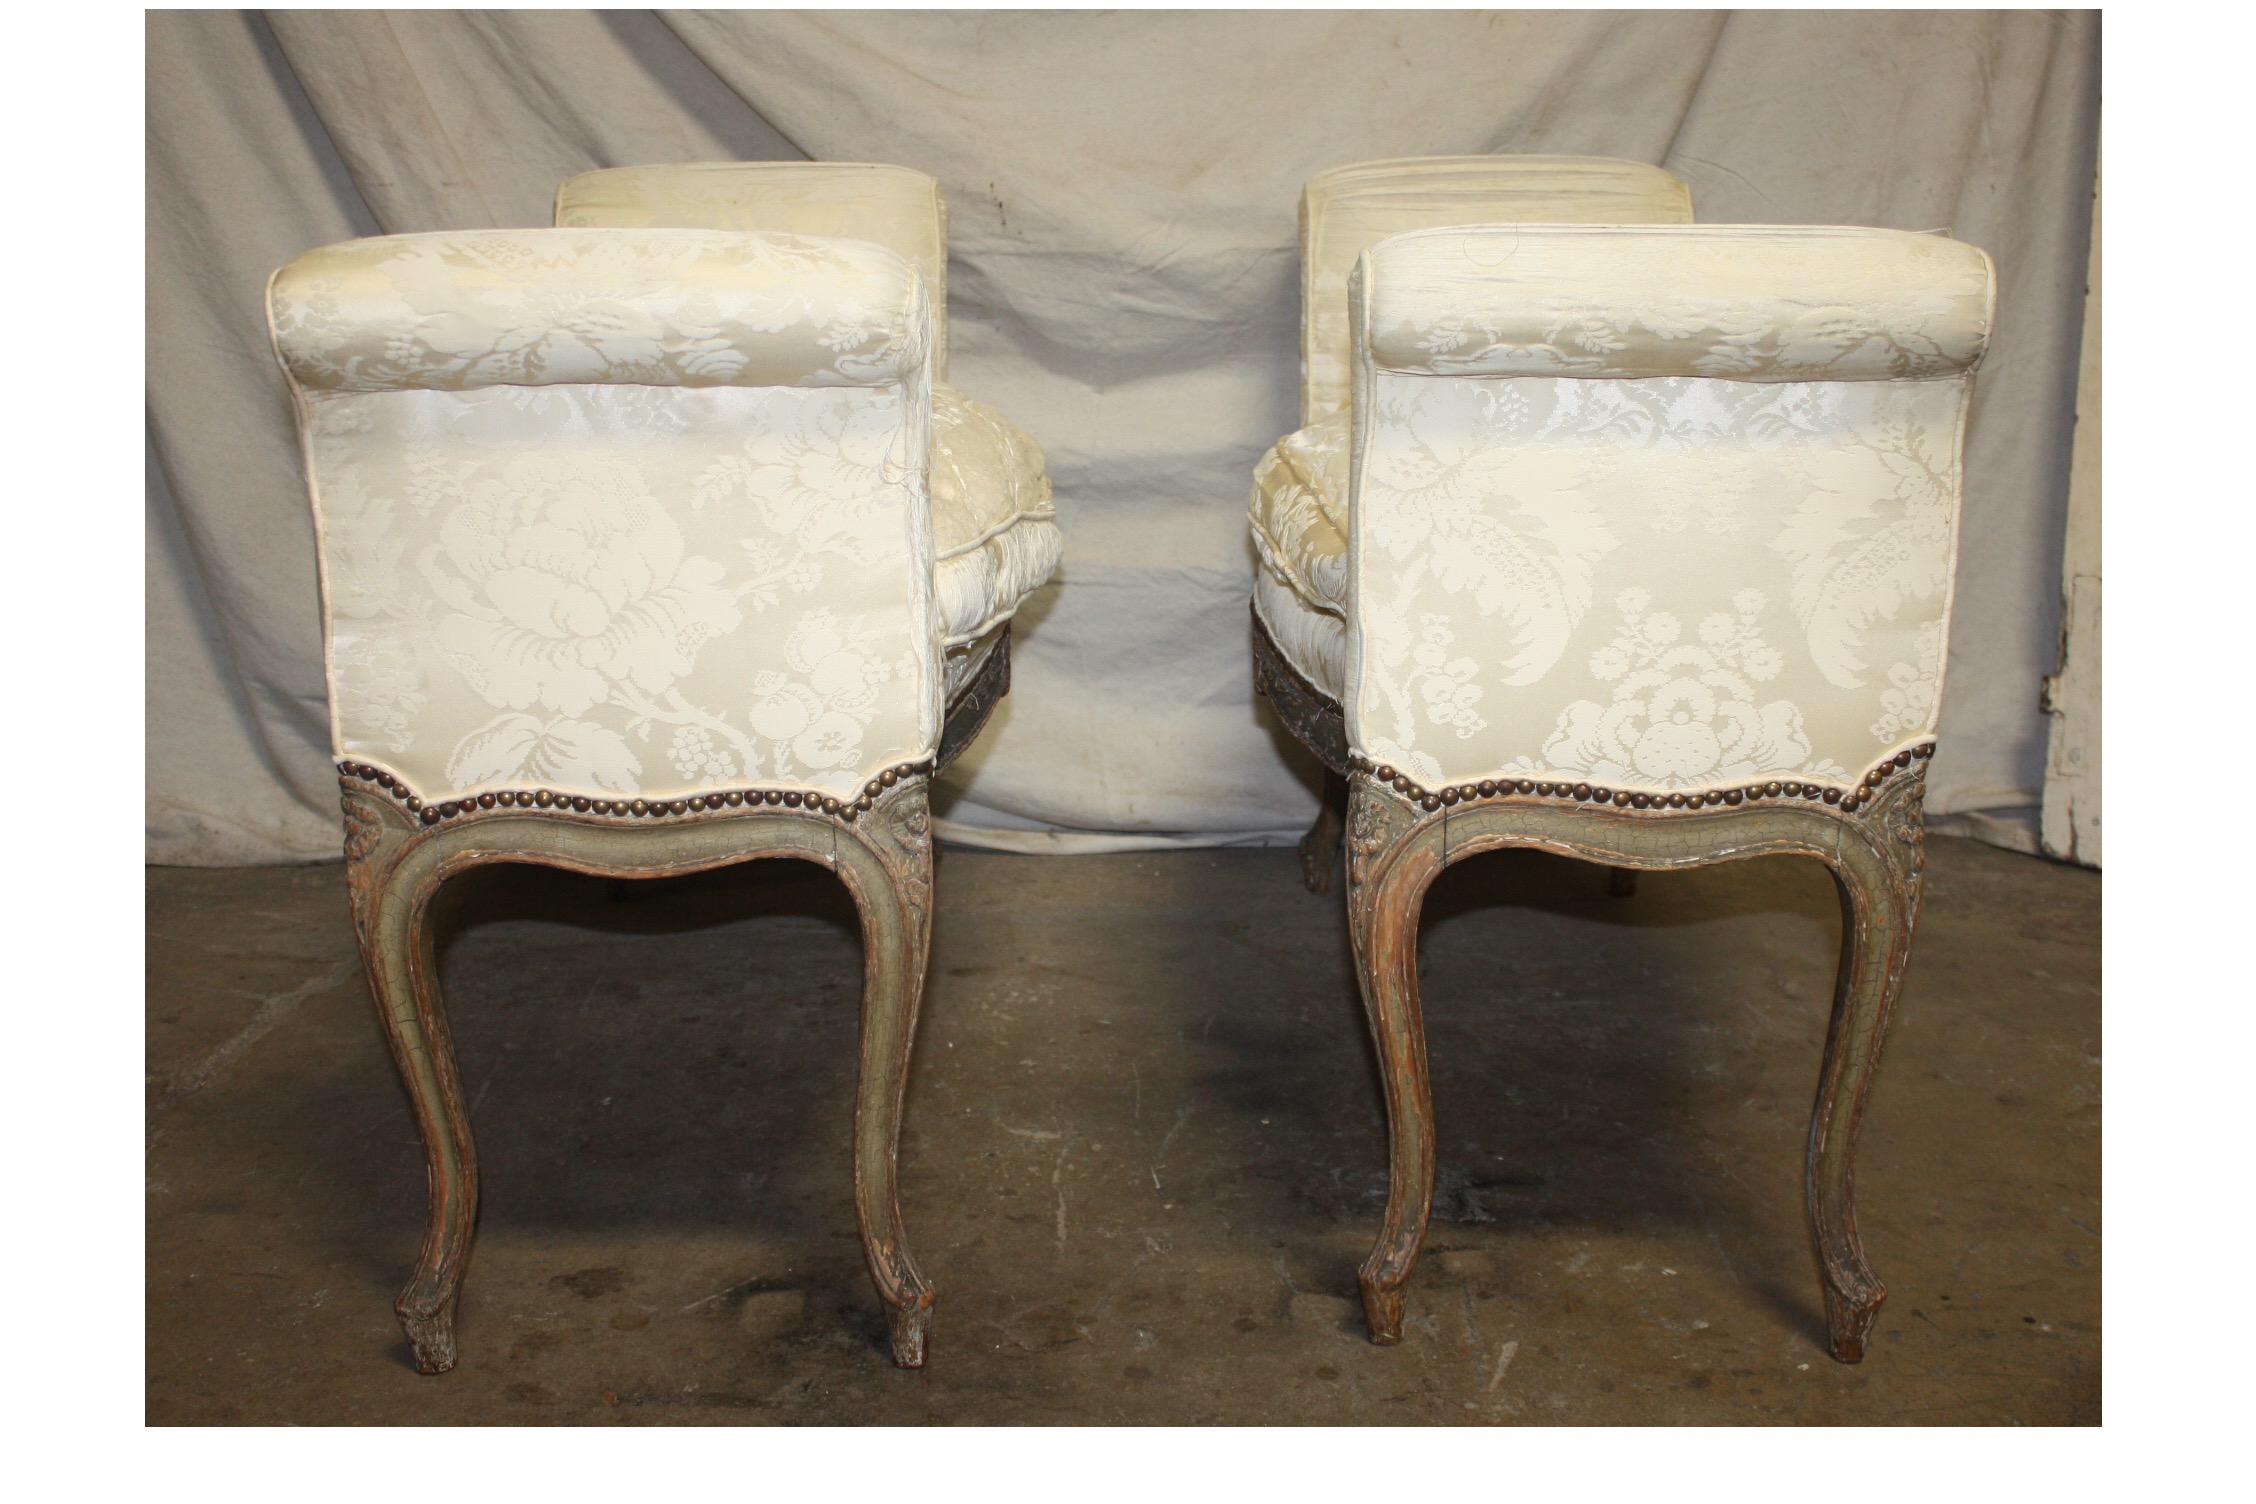 Hand-Painted Exquisite 18th Century Pair of French Benches